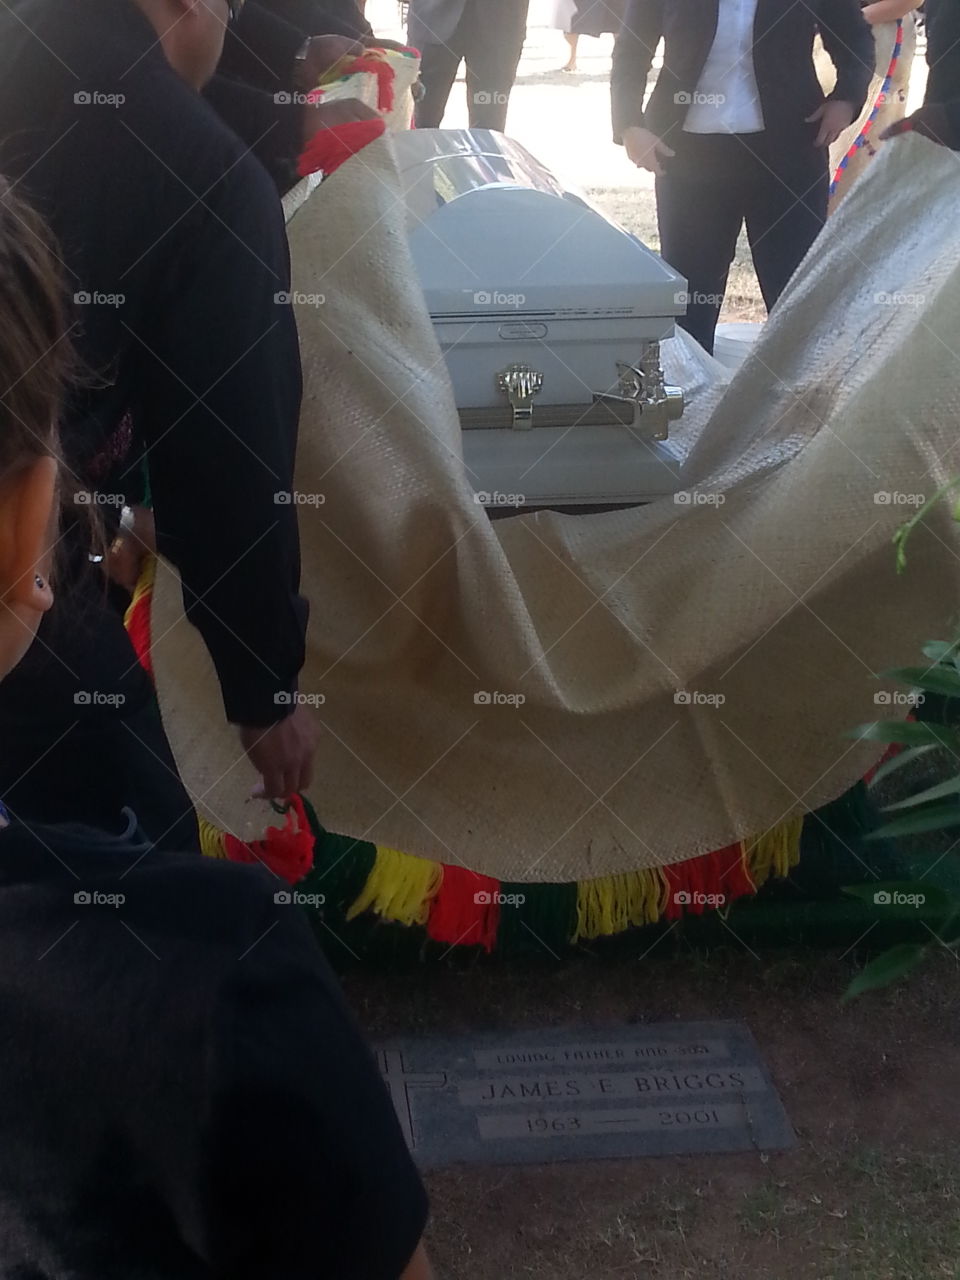 Goodbye Mote. My cousin passed away at the age of 2, his coffin was being wrapped as a Tongan traditon.